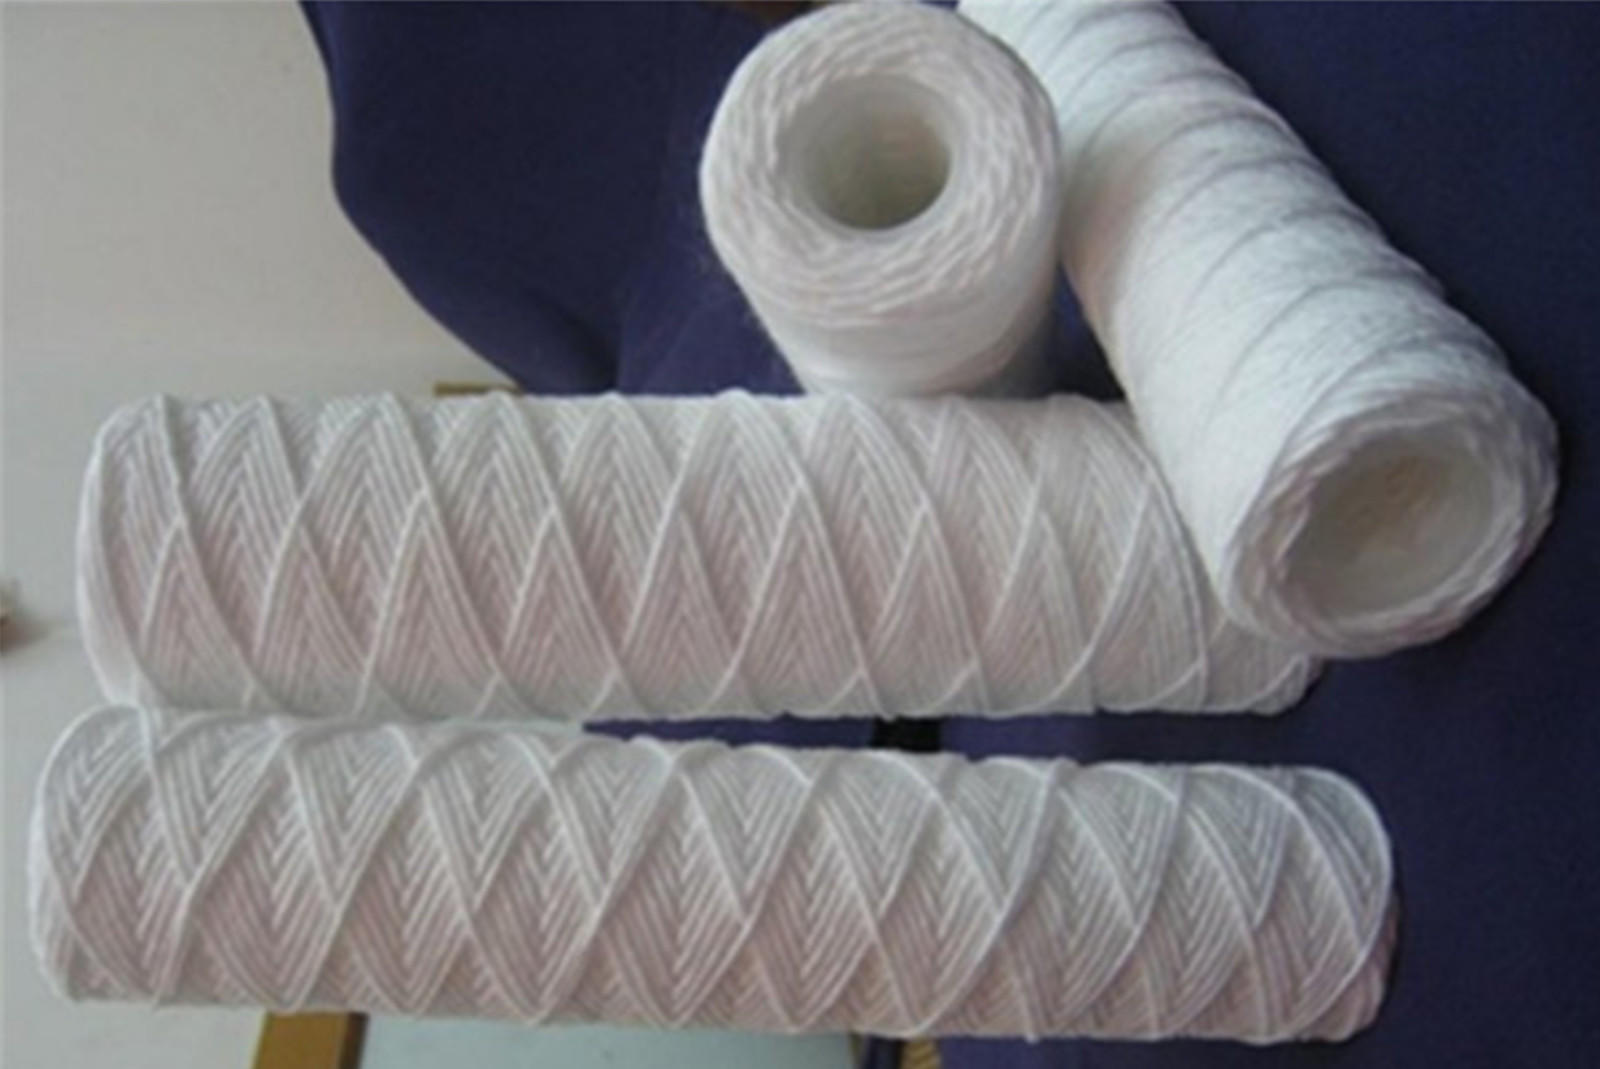 latest refillable water filter cartridge cartridge manufacturers for business